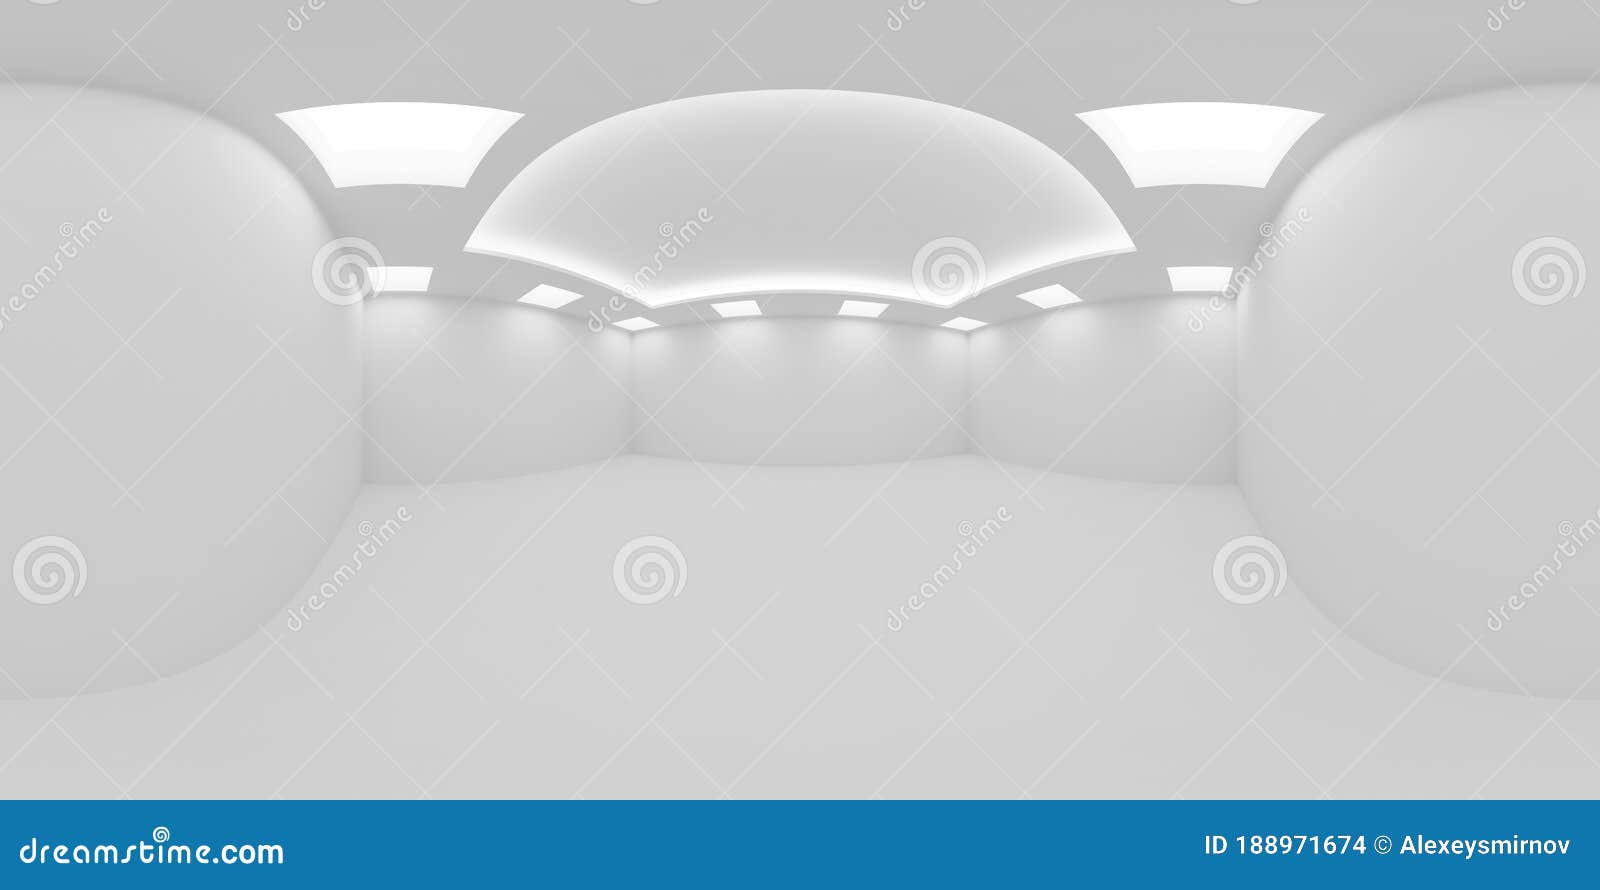 White empty room with square embedded ceiling lamps HDRI map. HDRI environment map of white empty room with white wall, floor and ceiling with square embedded ceiling lamps and hidden ceiling lights, 360 degrees spherical panorama background, 3d illustration